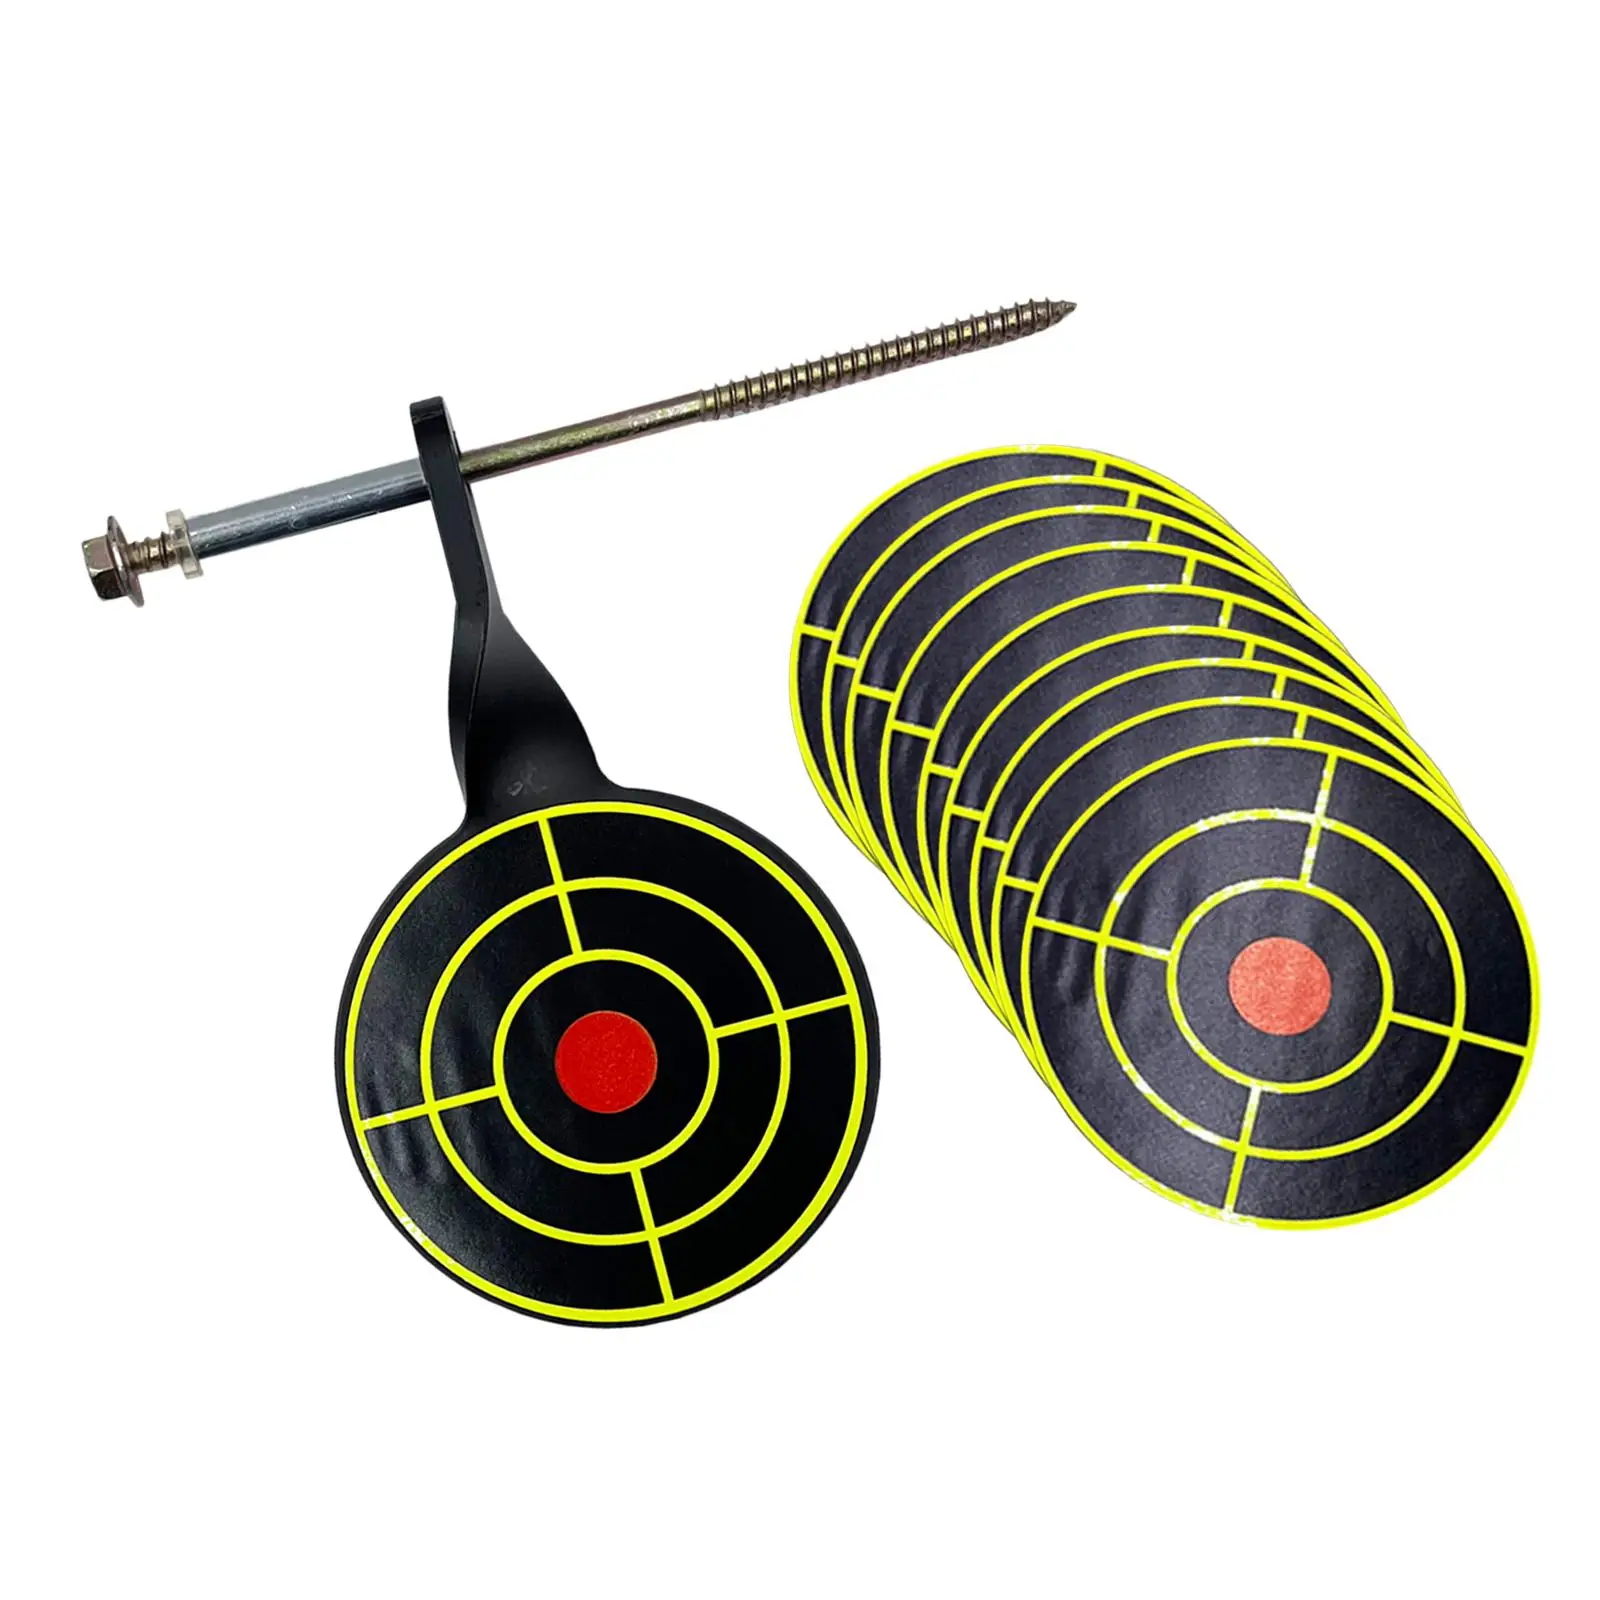 Metal Practice Target Portable 5mm Tree Standing Target Easy Carry for Outdoor Sports Toy